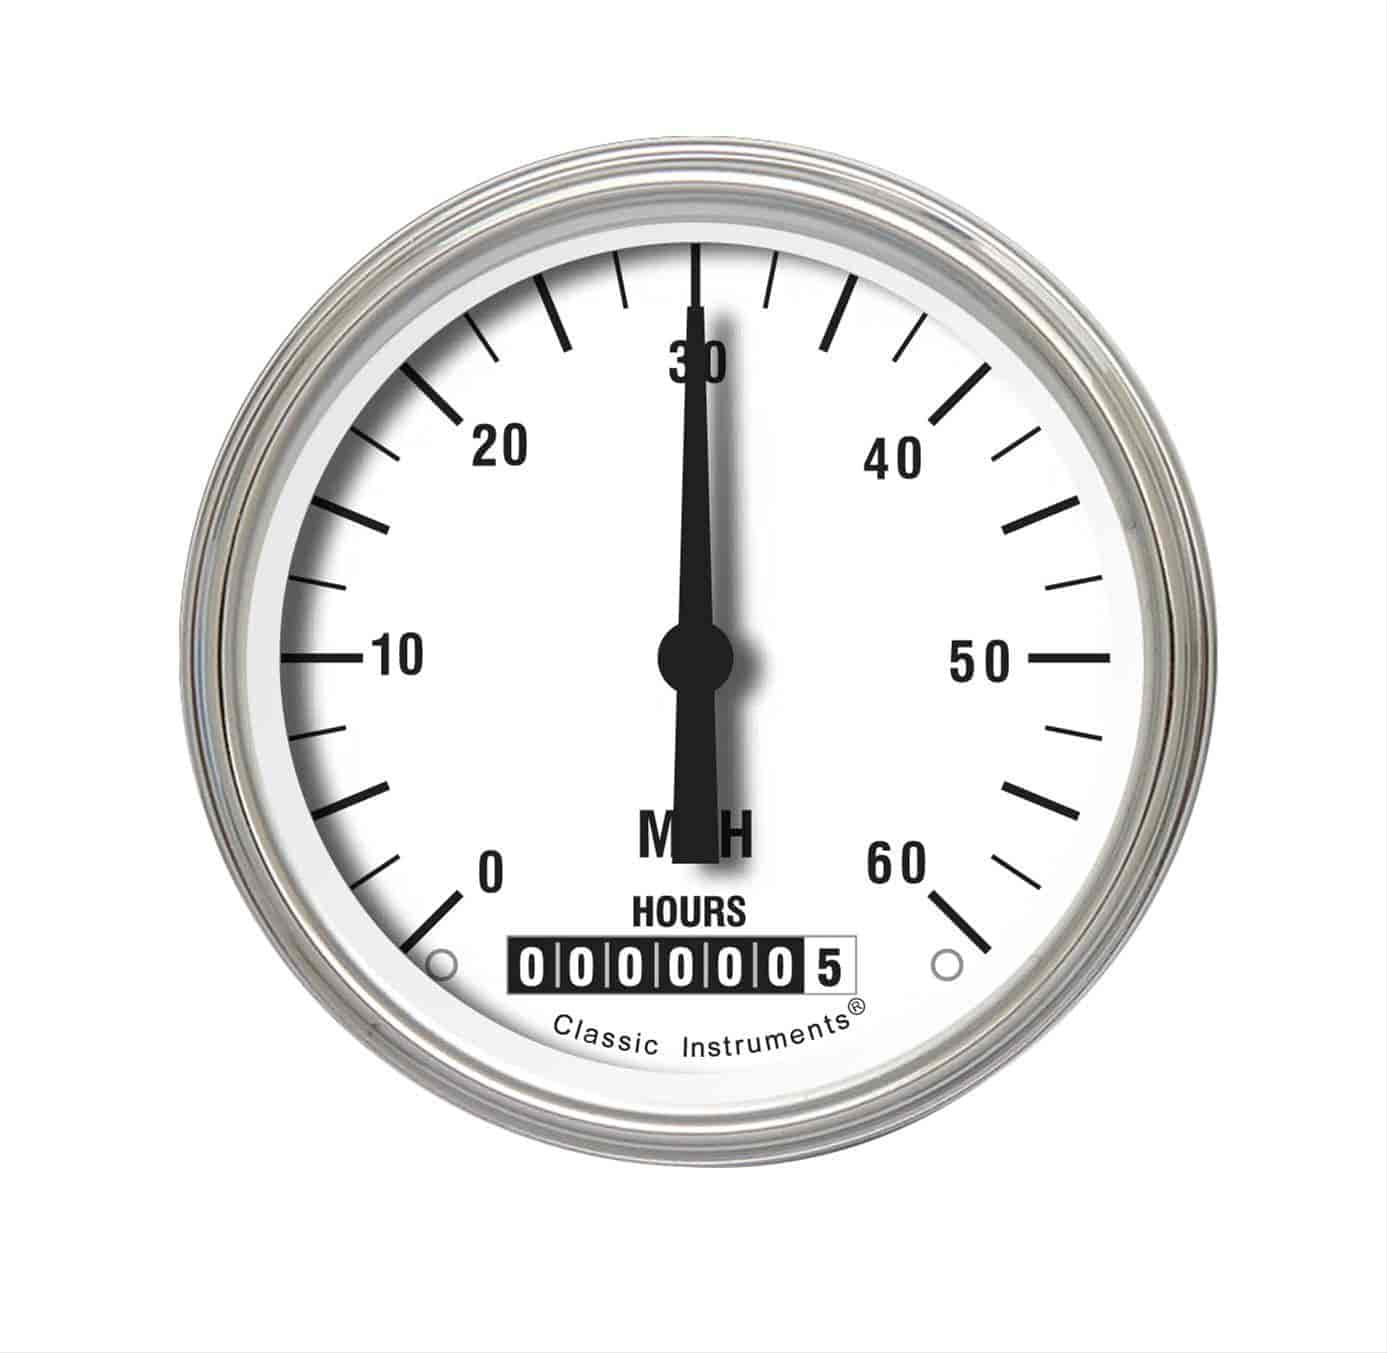 Low Speed Series Speedometer with Hour Meter All American Tradition Style